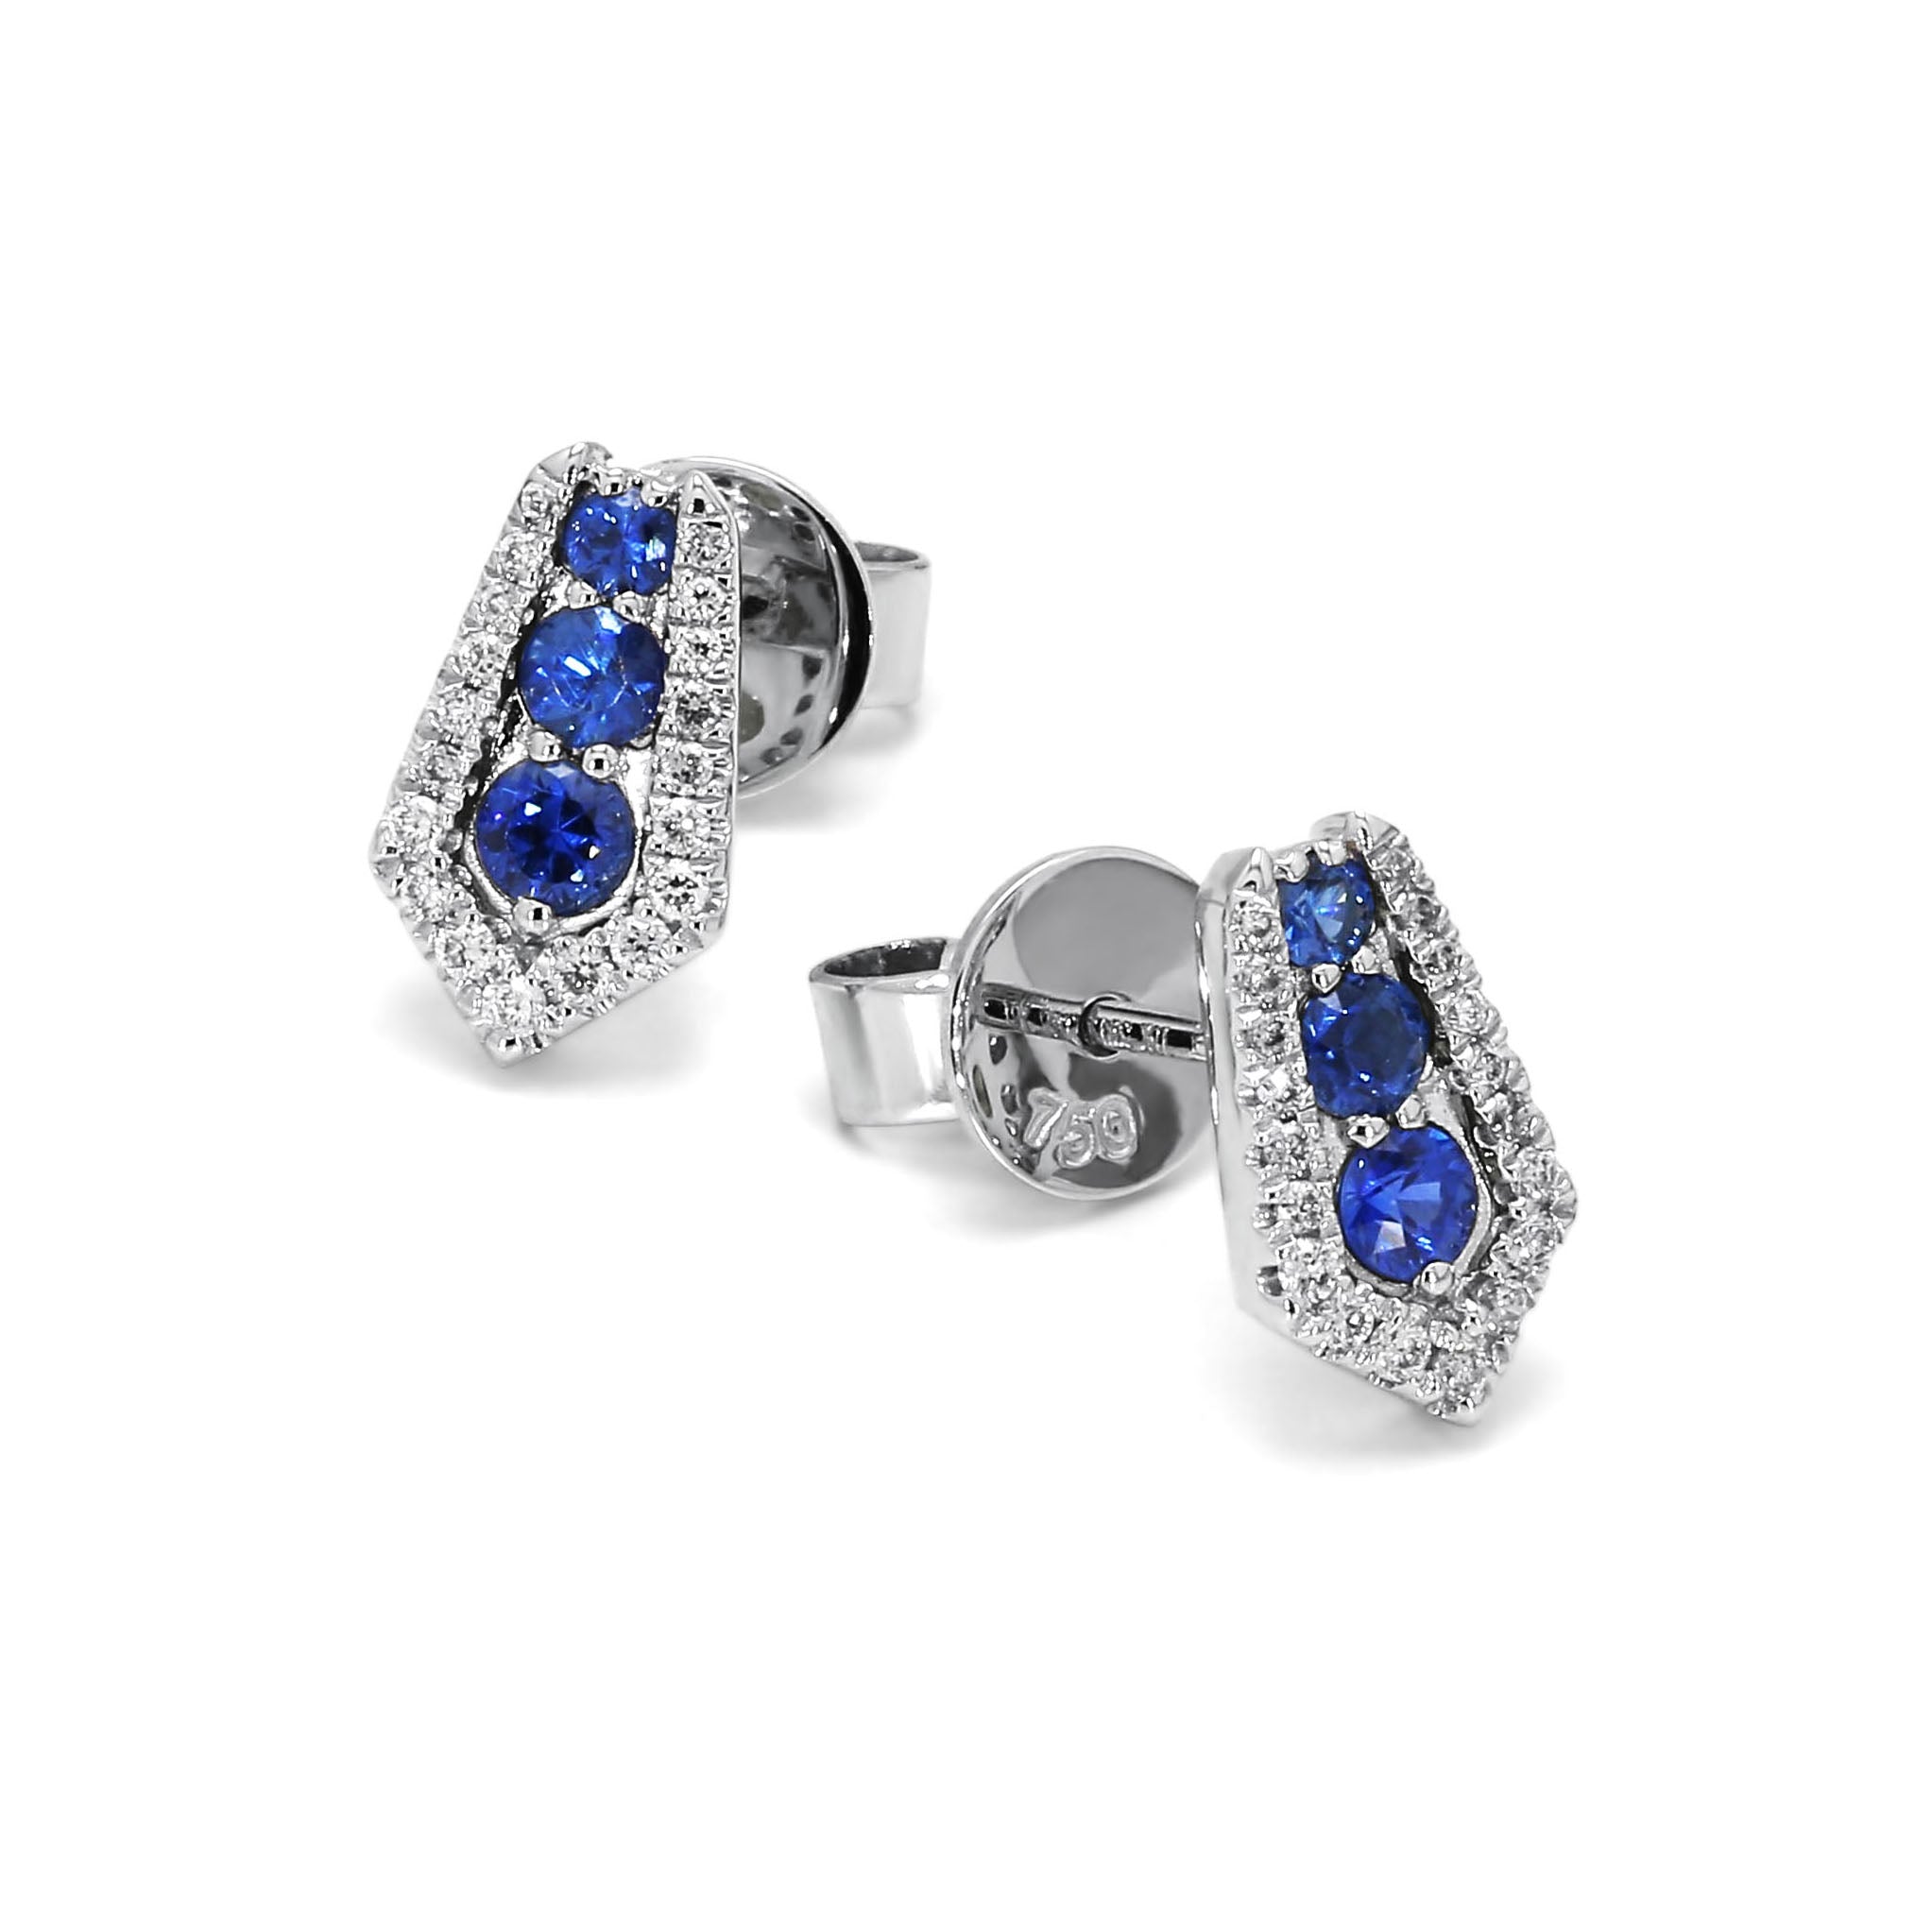 Adamar Jewels CREENCIA Dulce Earrings in 18K white gold set with sapphire and diamonds